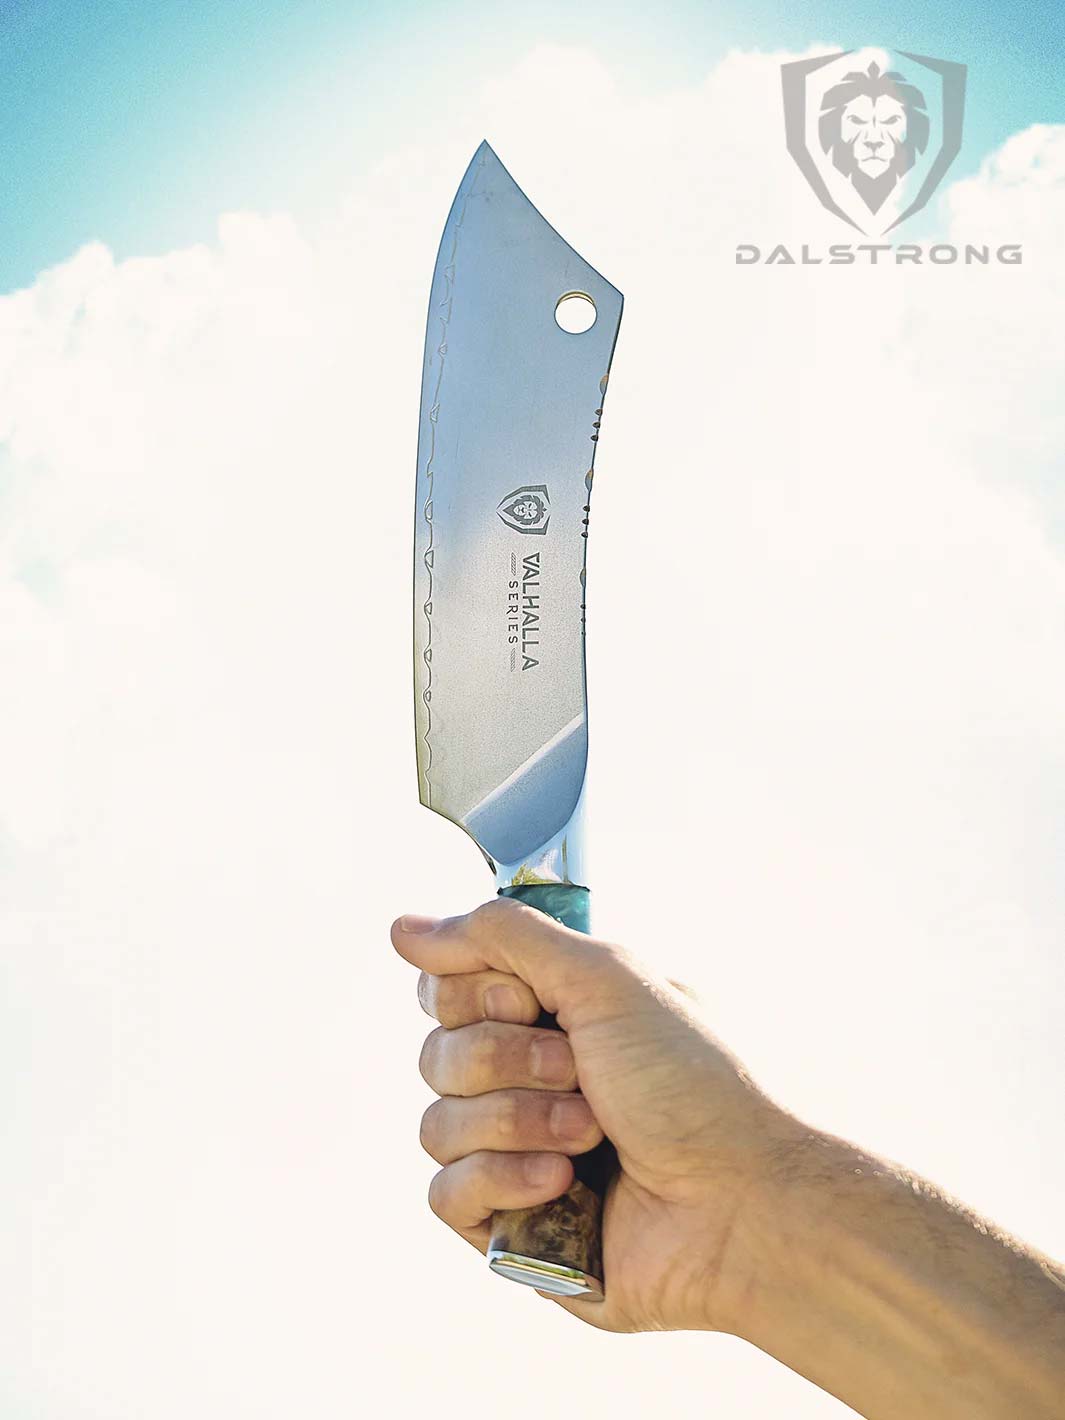 Cleaver Knife 9 | The Ravager | Valhalla Series | Dalstrong